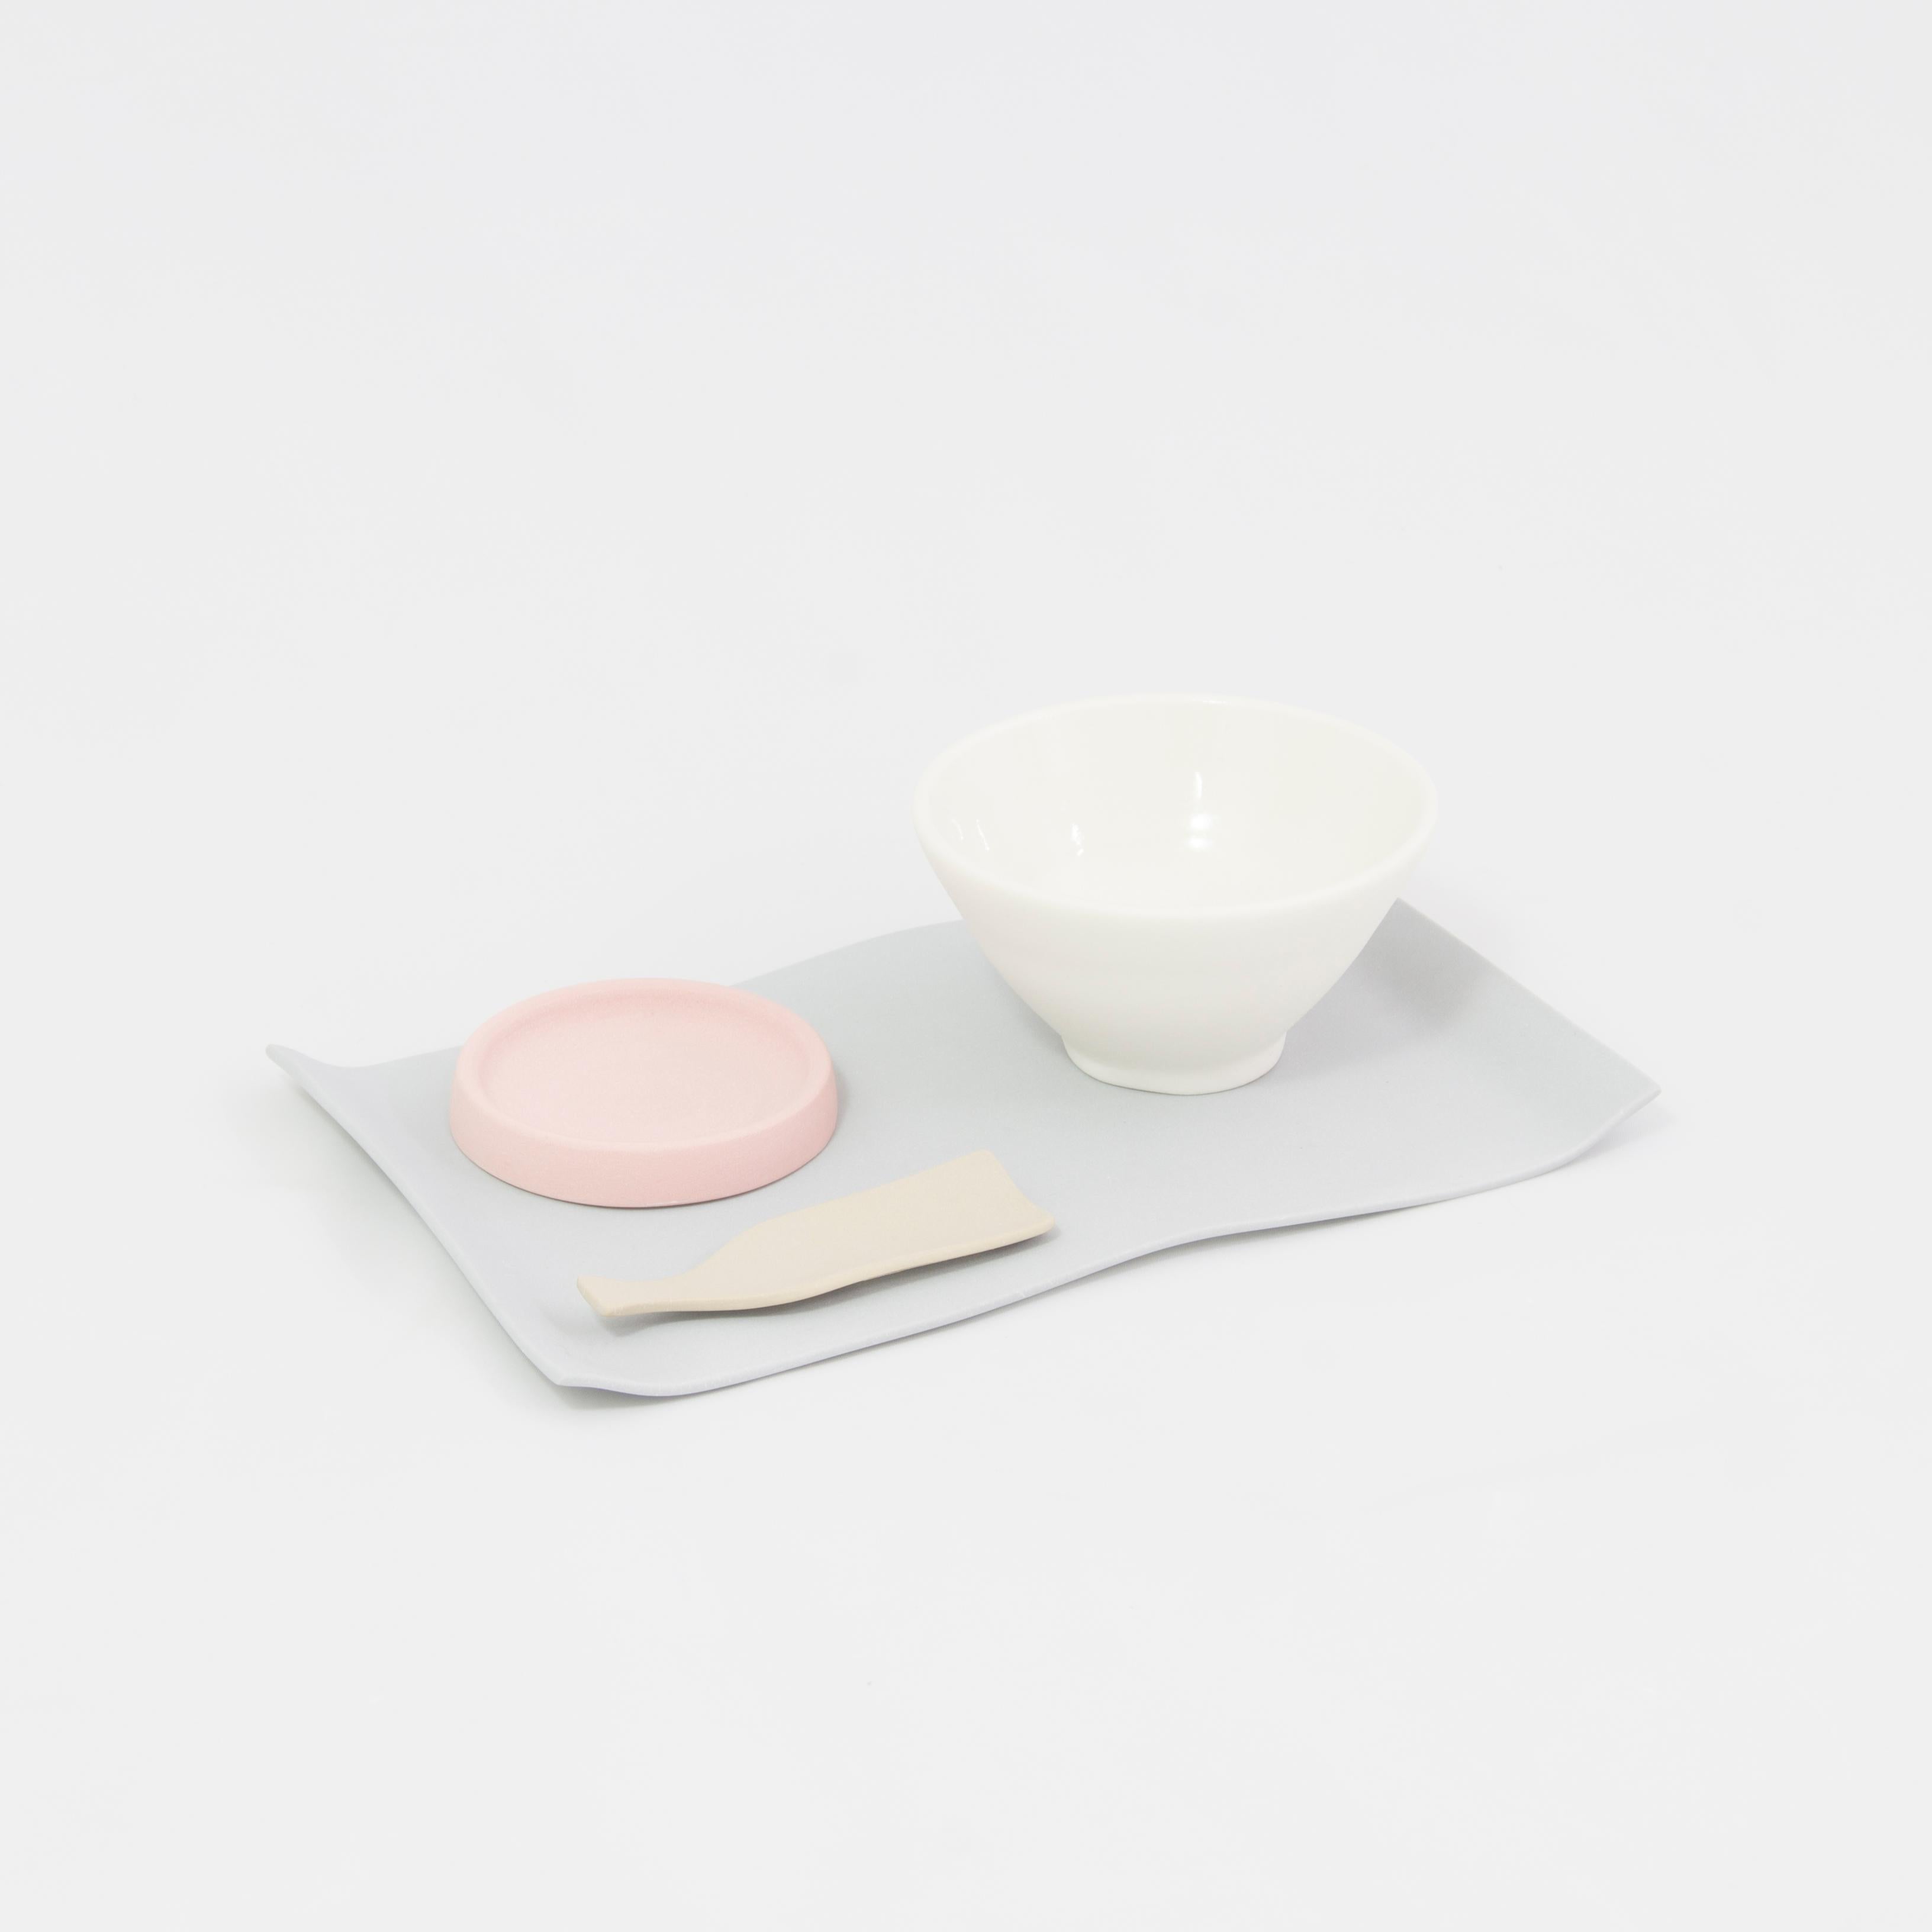 Each tea set is handcrafted by Mexican artisans. Slight variations in shape and size are to be expected and embraced as they add to the uniqueness of every piece. 

This tea cups can be used coffee, too. They are microwave and dishwasher safe,